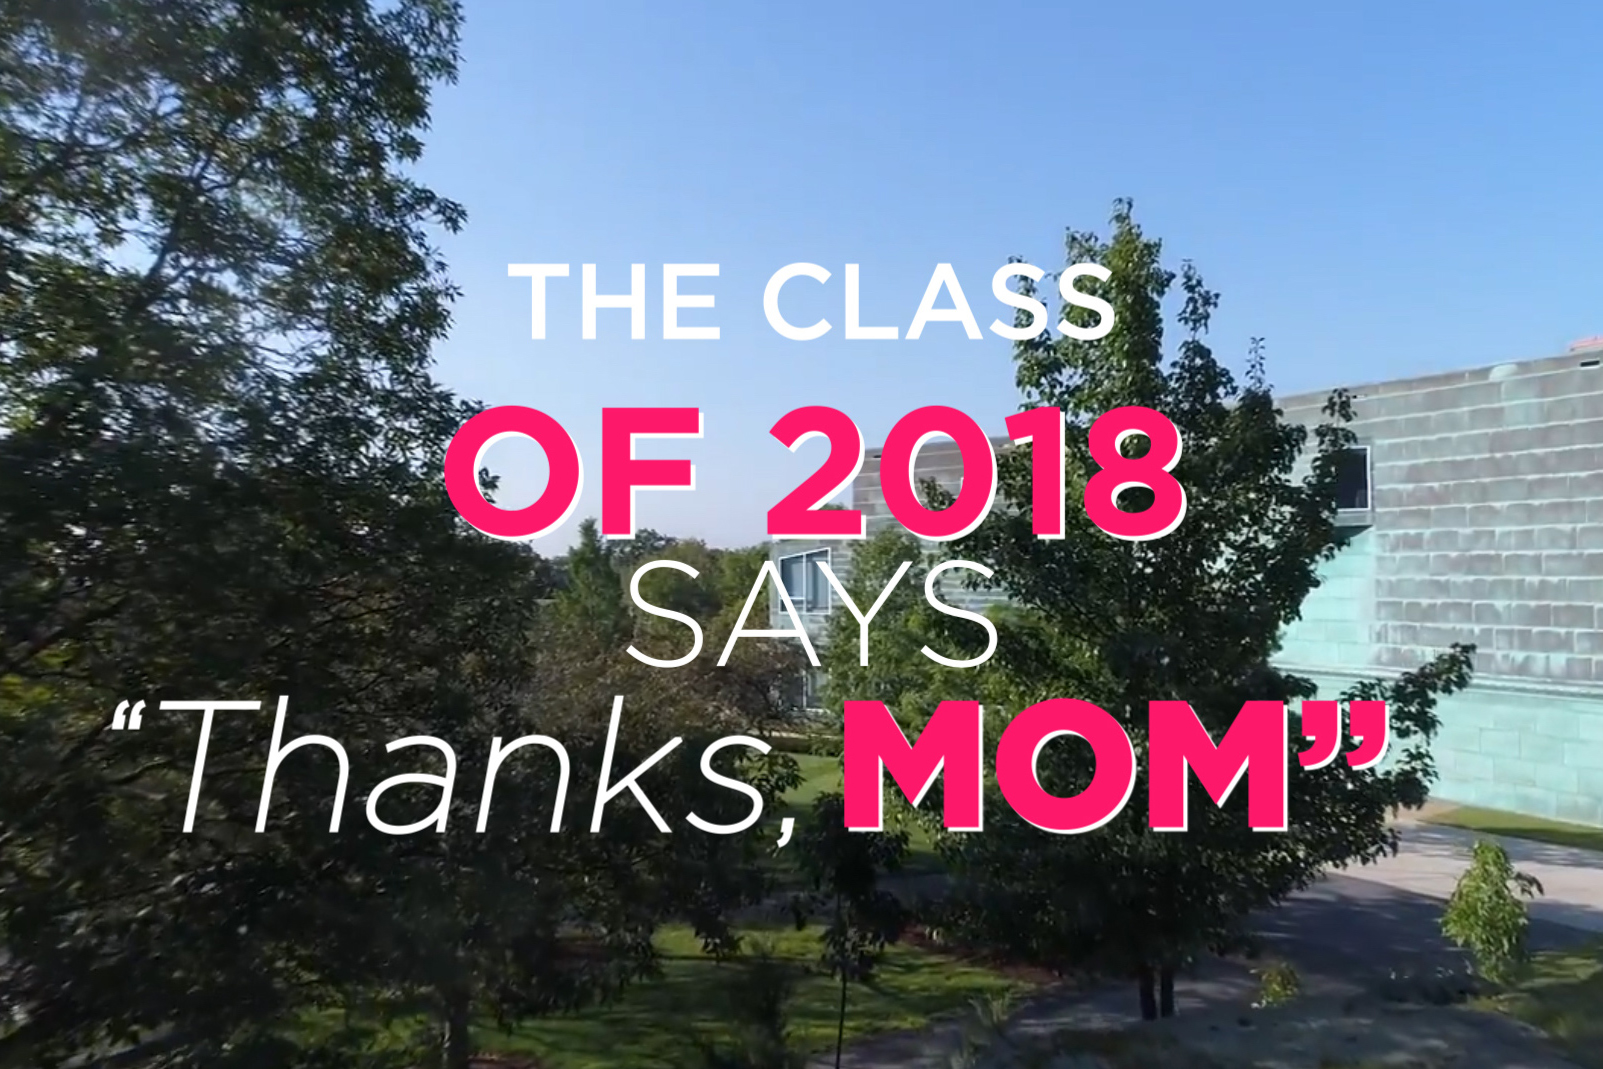 Text: Class of 2018 says "Thanks Mom!"